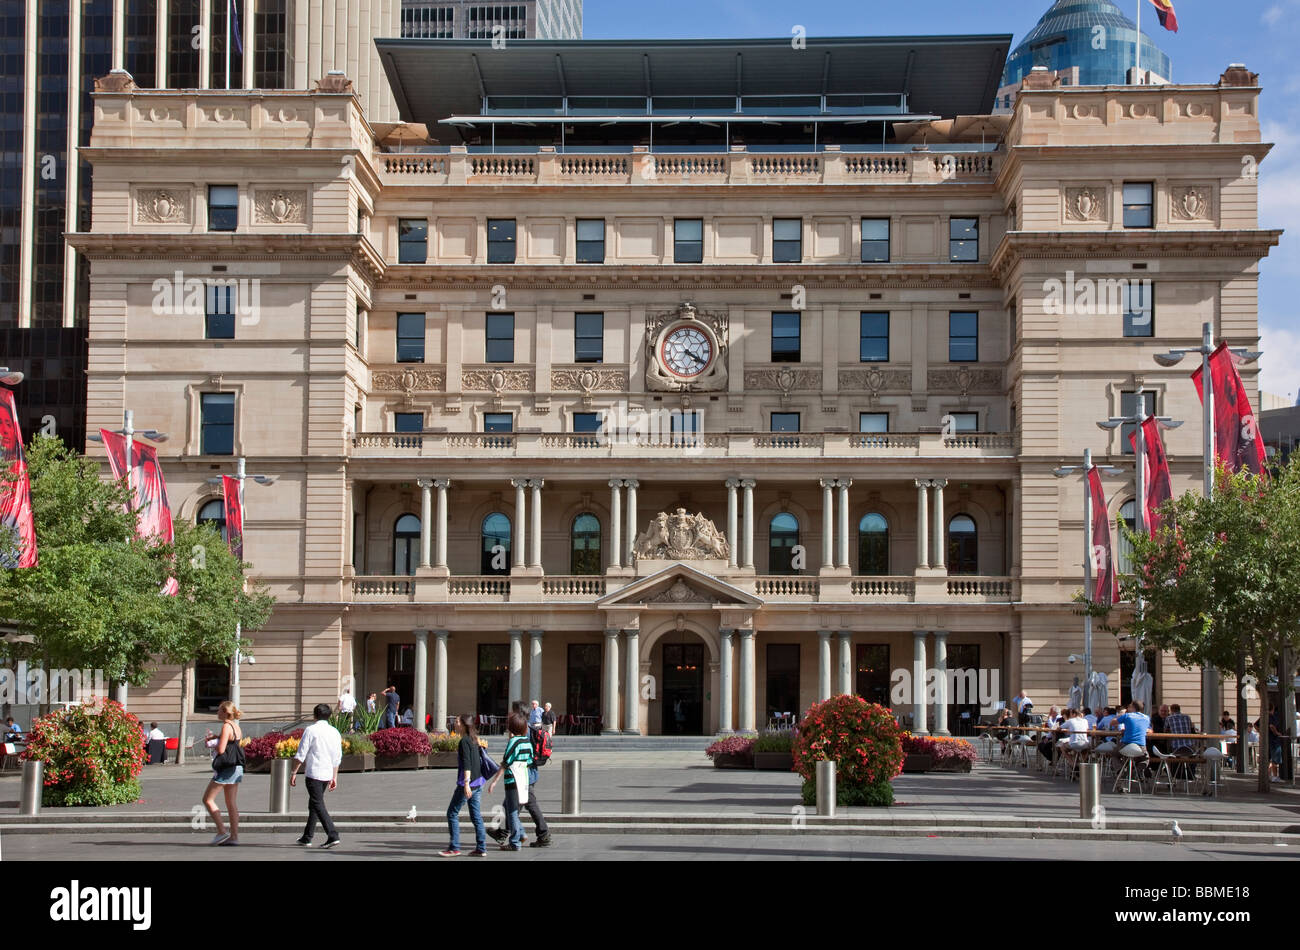 Australia New South Wales. The old Sydney Customs House. Stock Photo